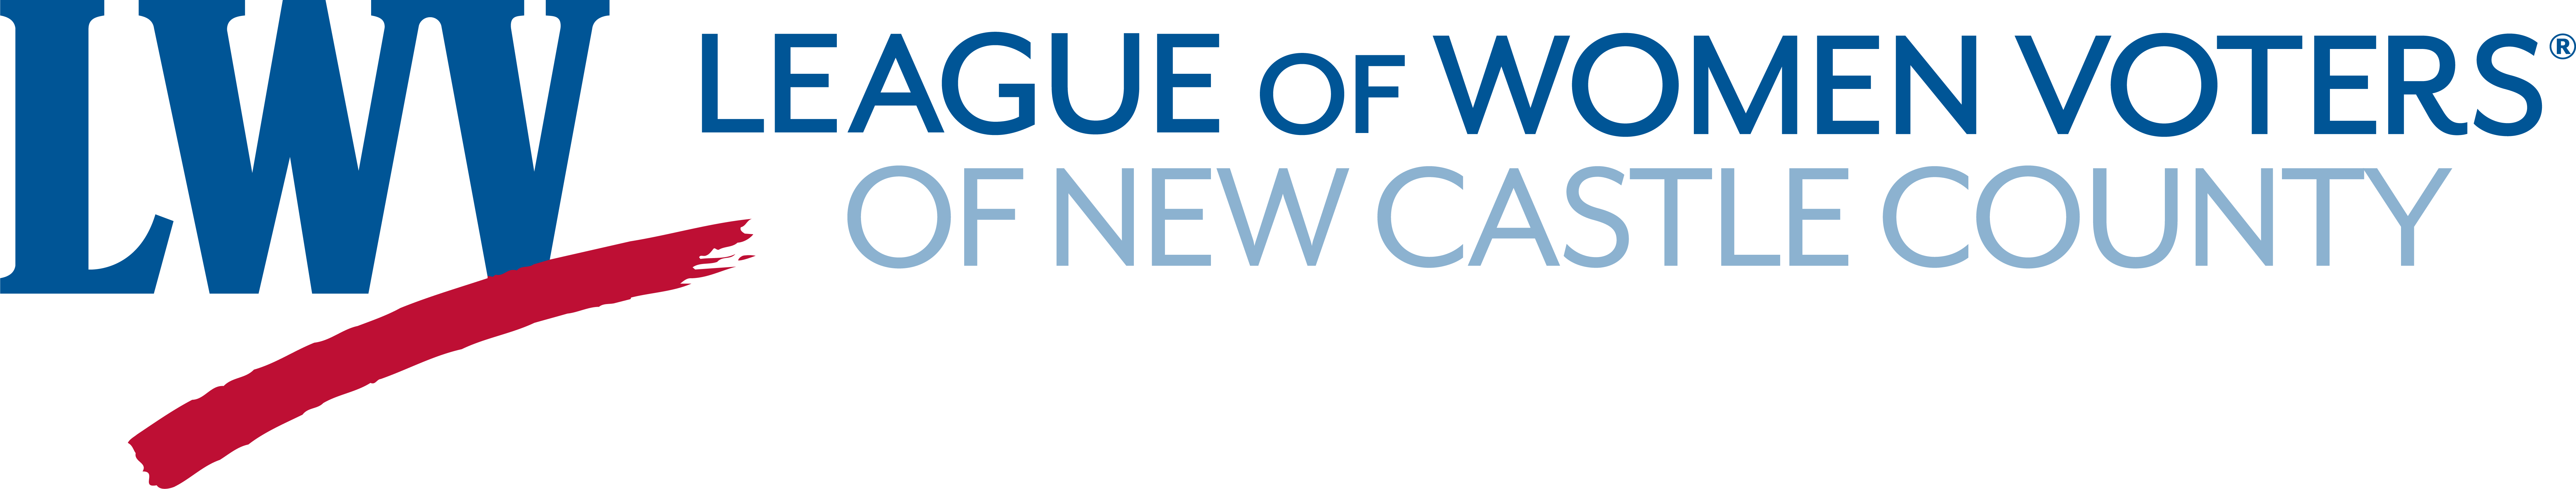 League of Women Voters of New Castle County